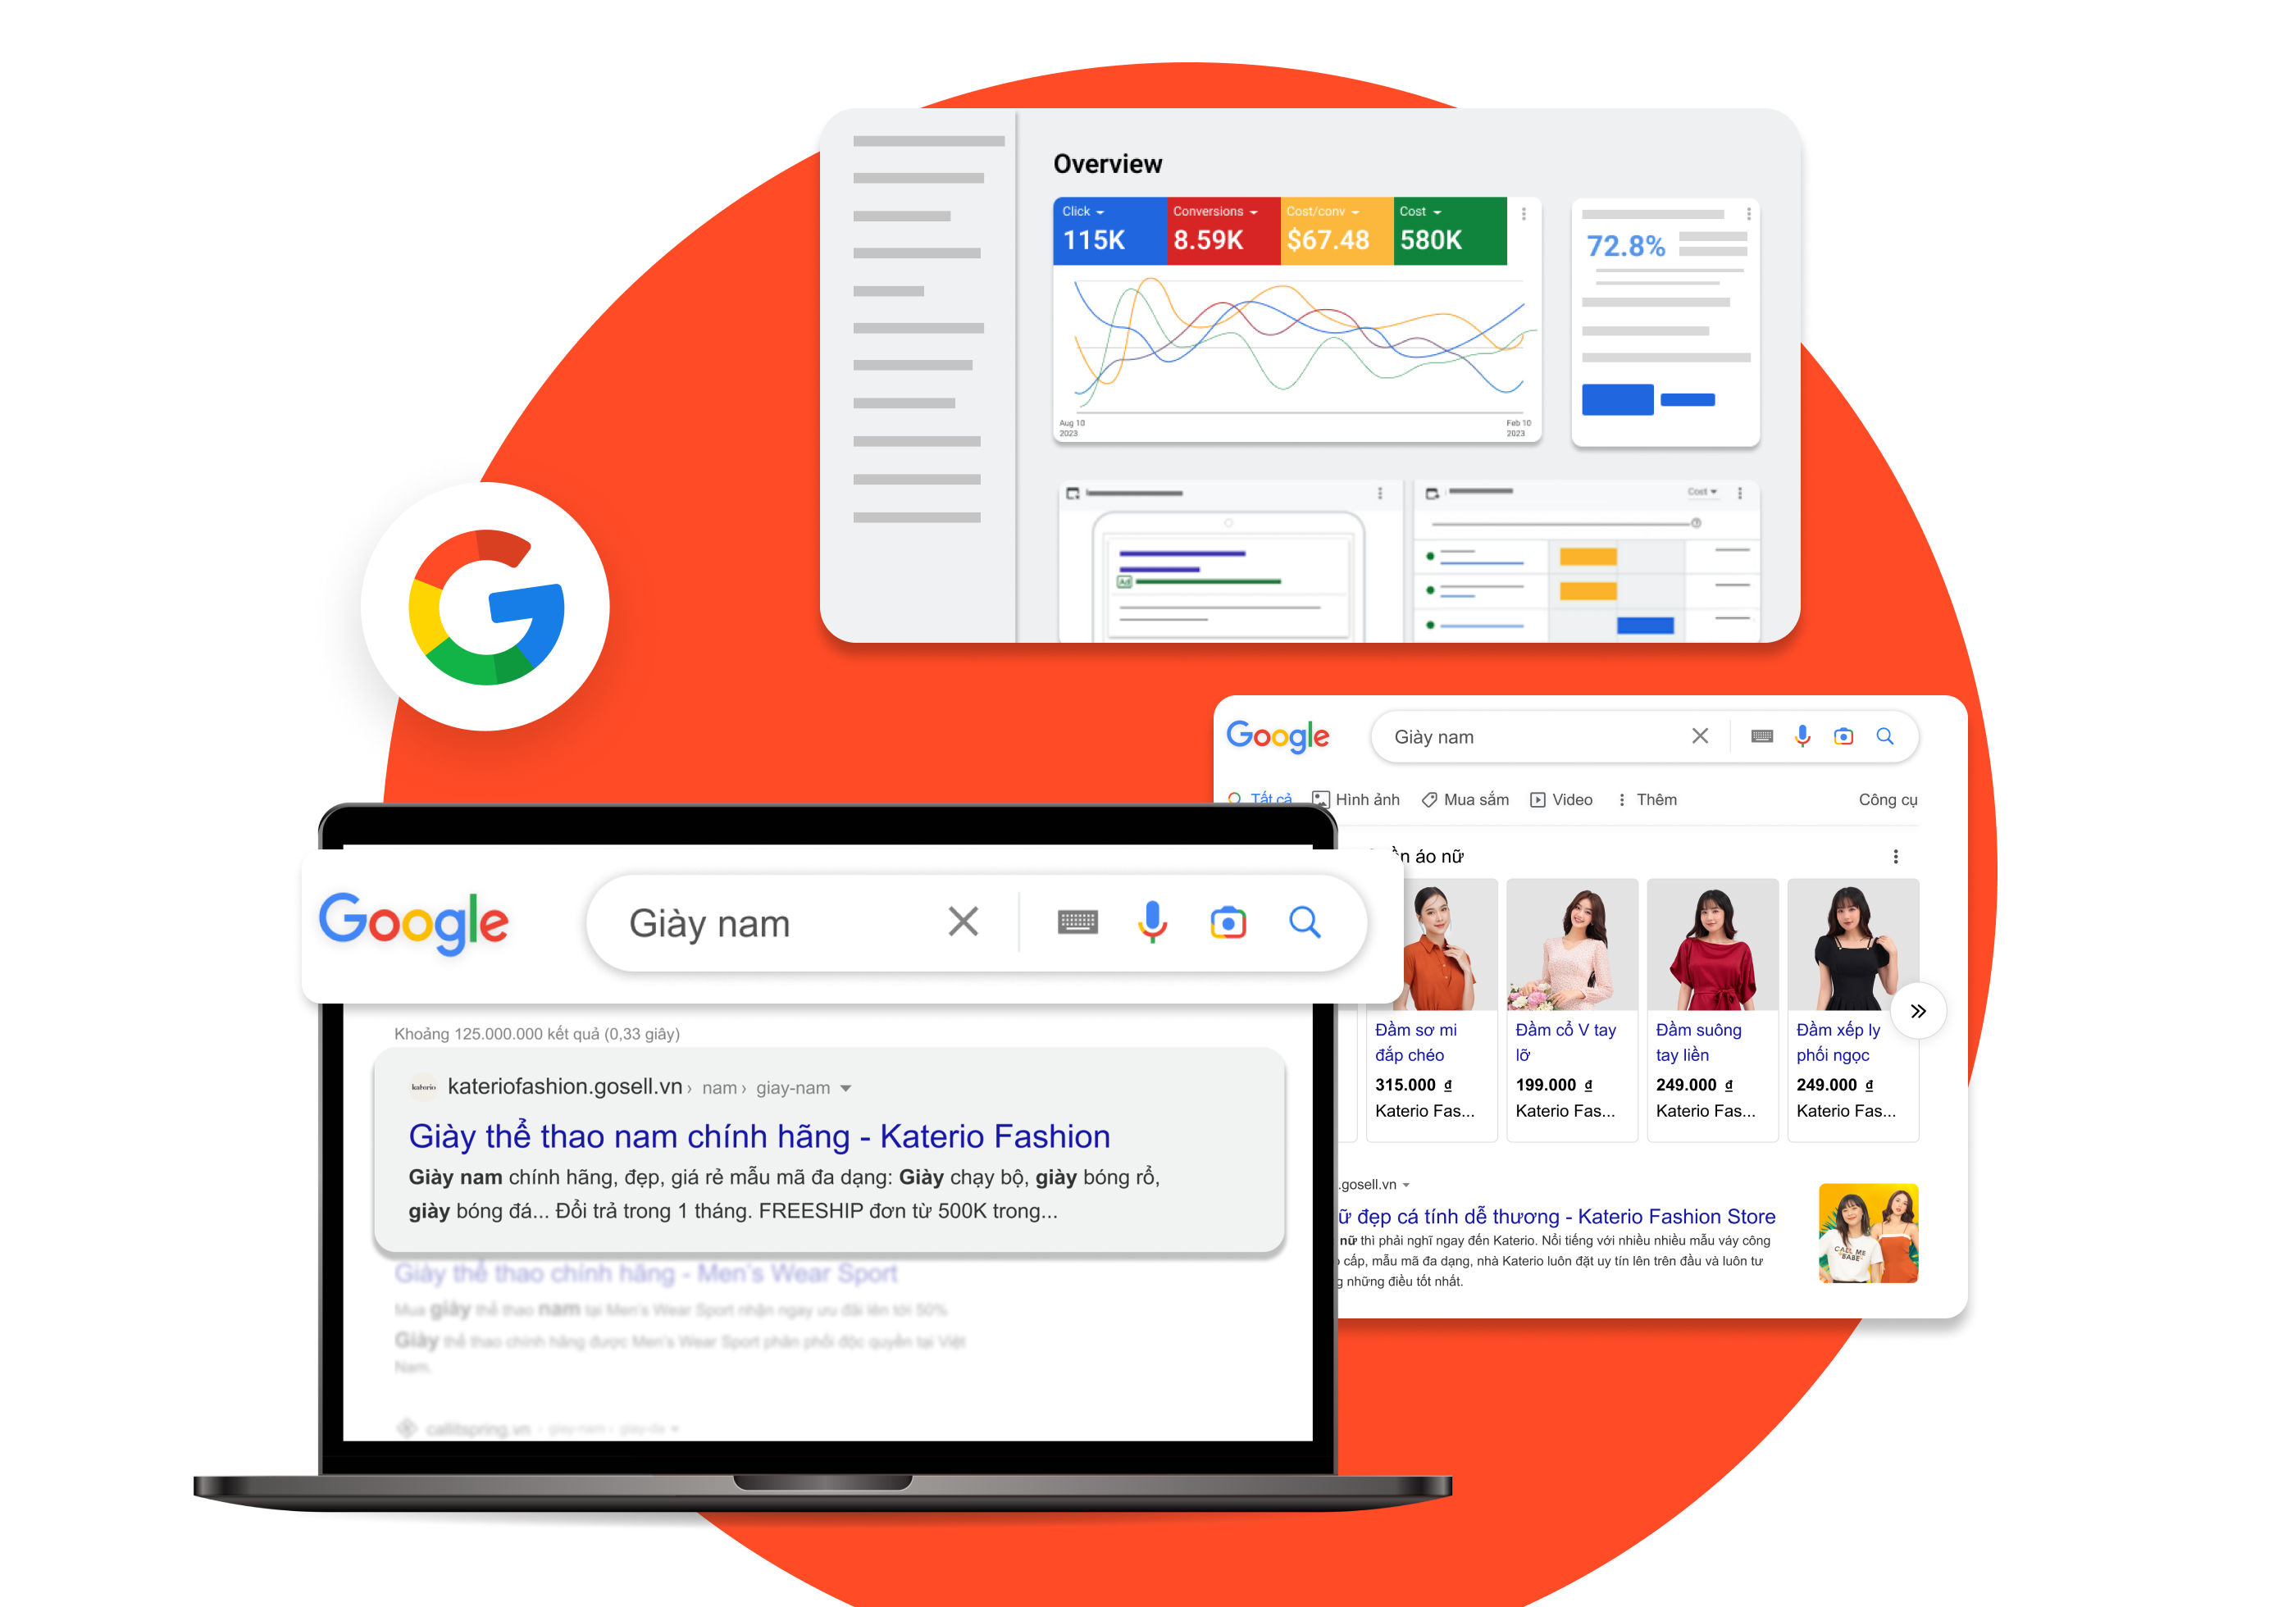 Implementing Google AdWords advertising campaigns